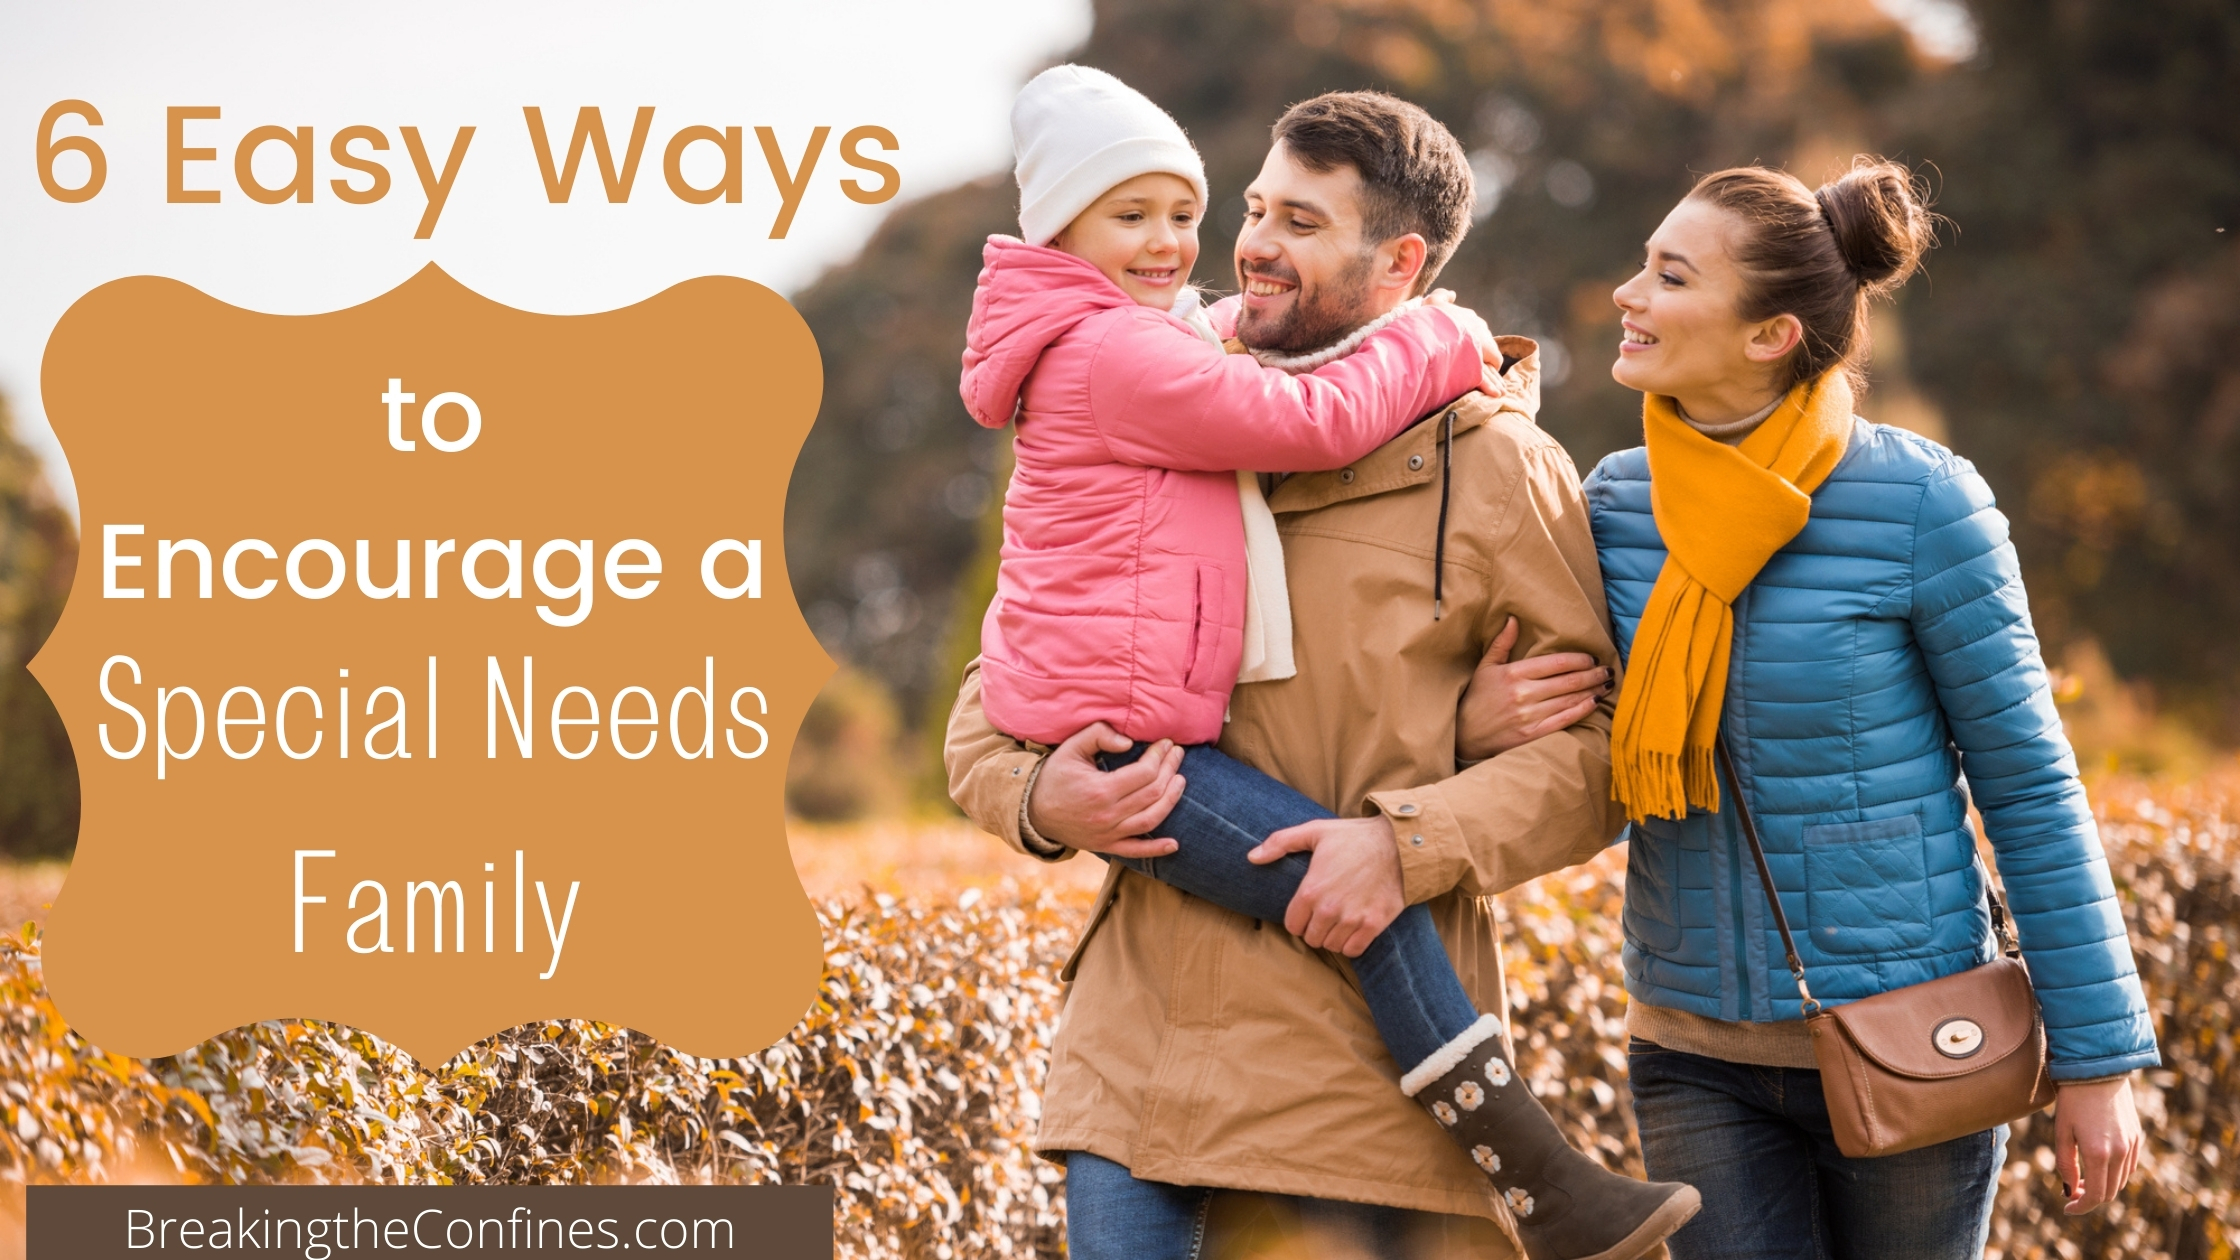 6 easy ways to encourage a special needs family